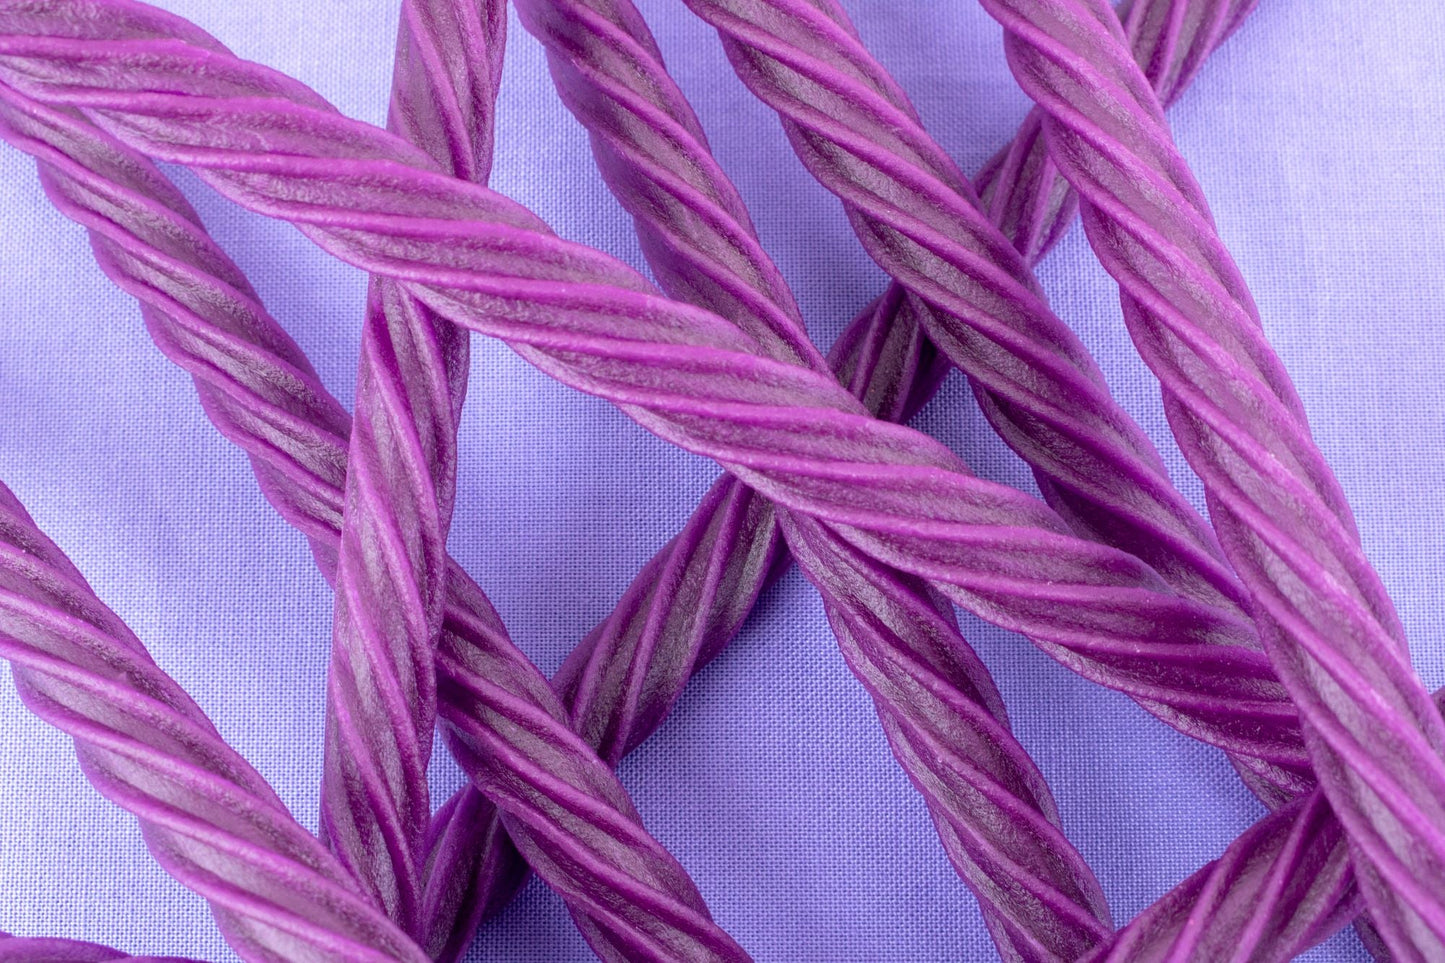 Chewy Grape Purple Licorice Twists in a pile